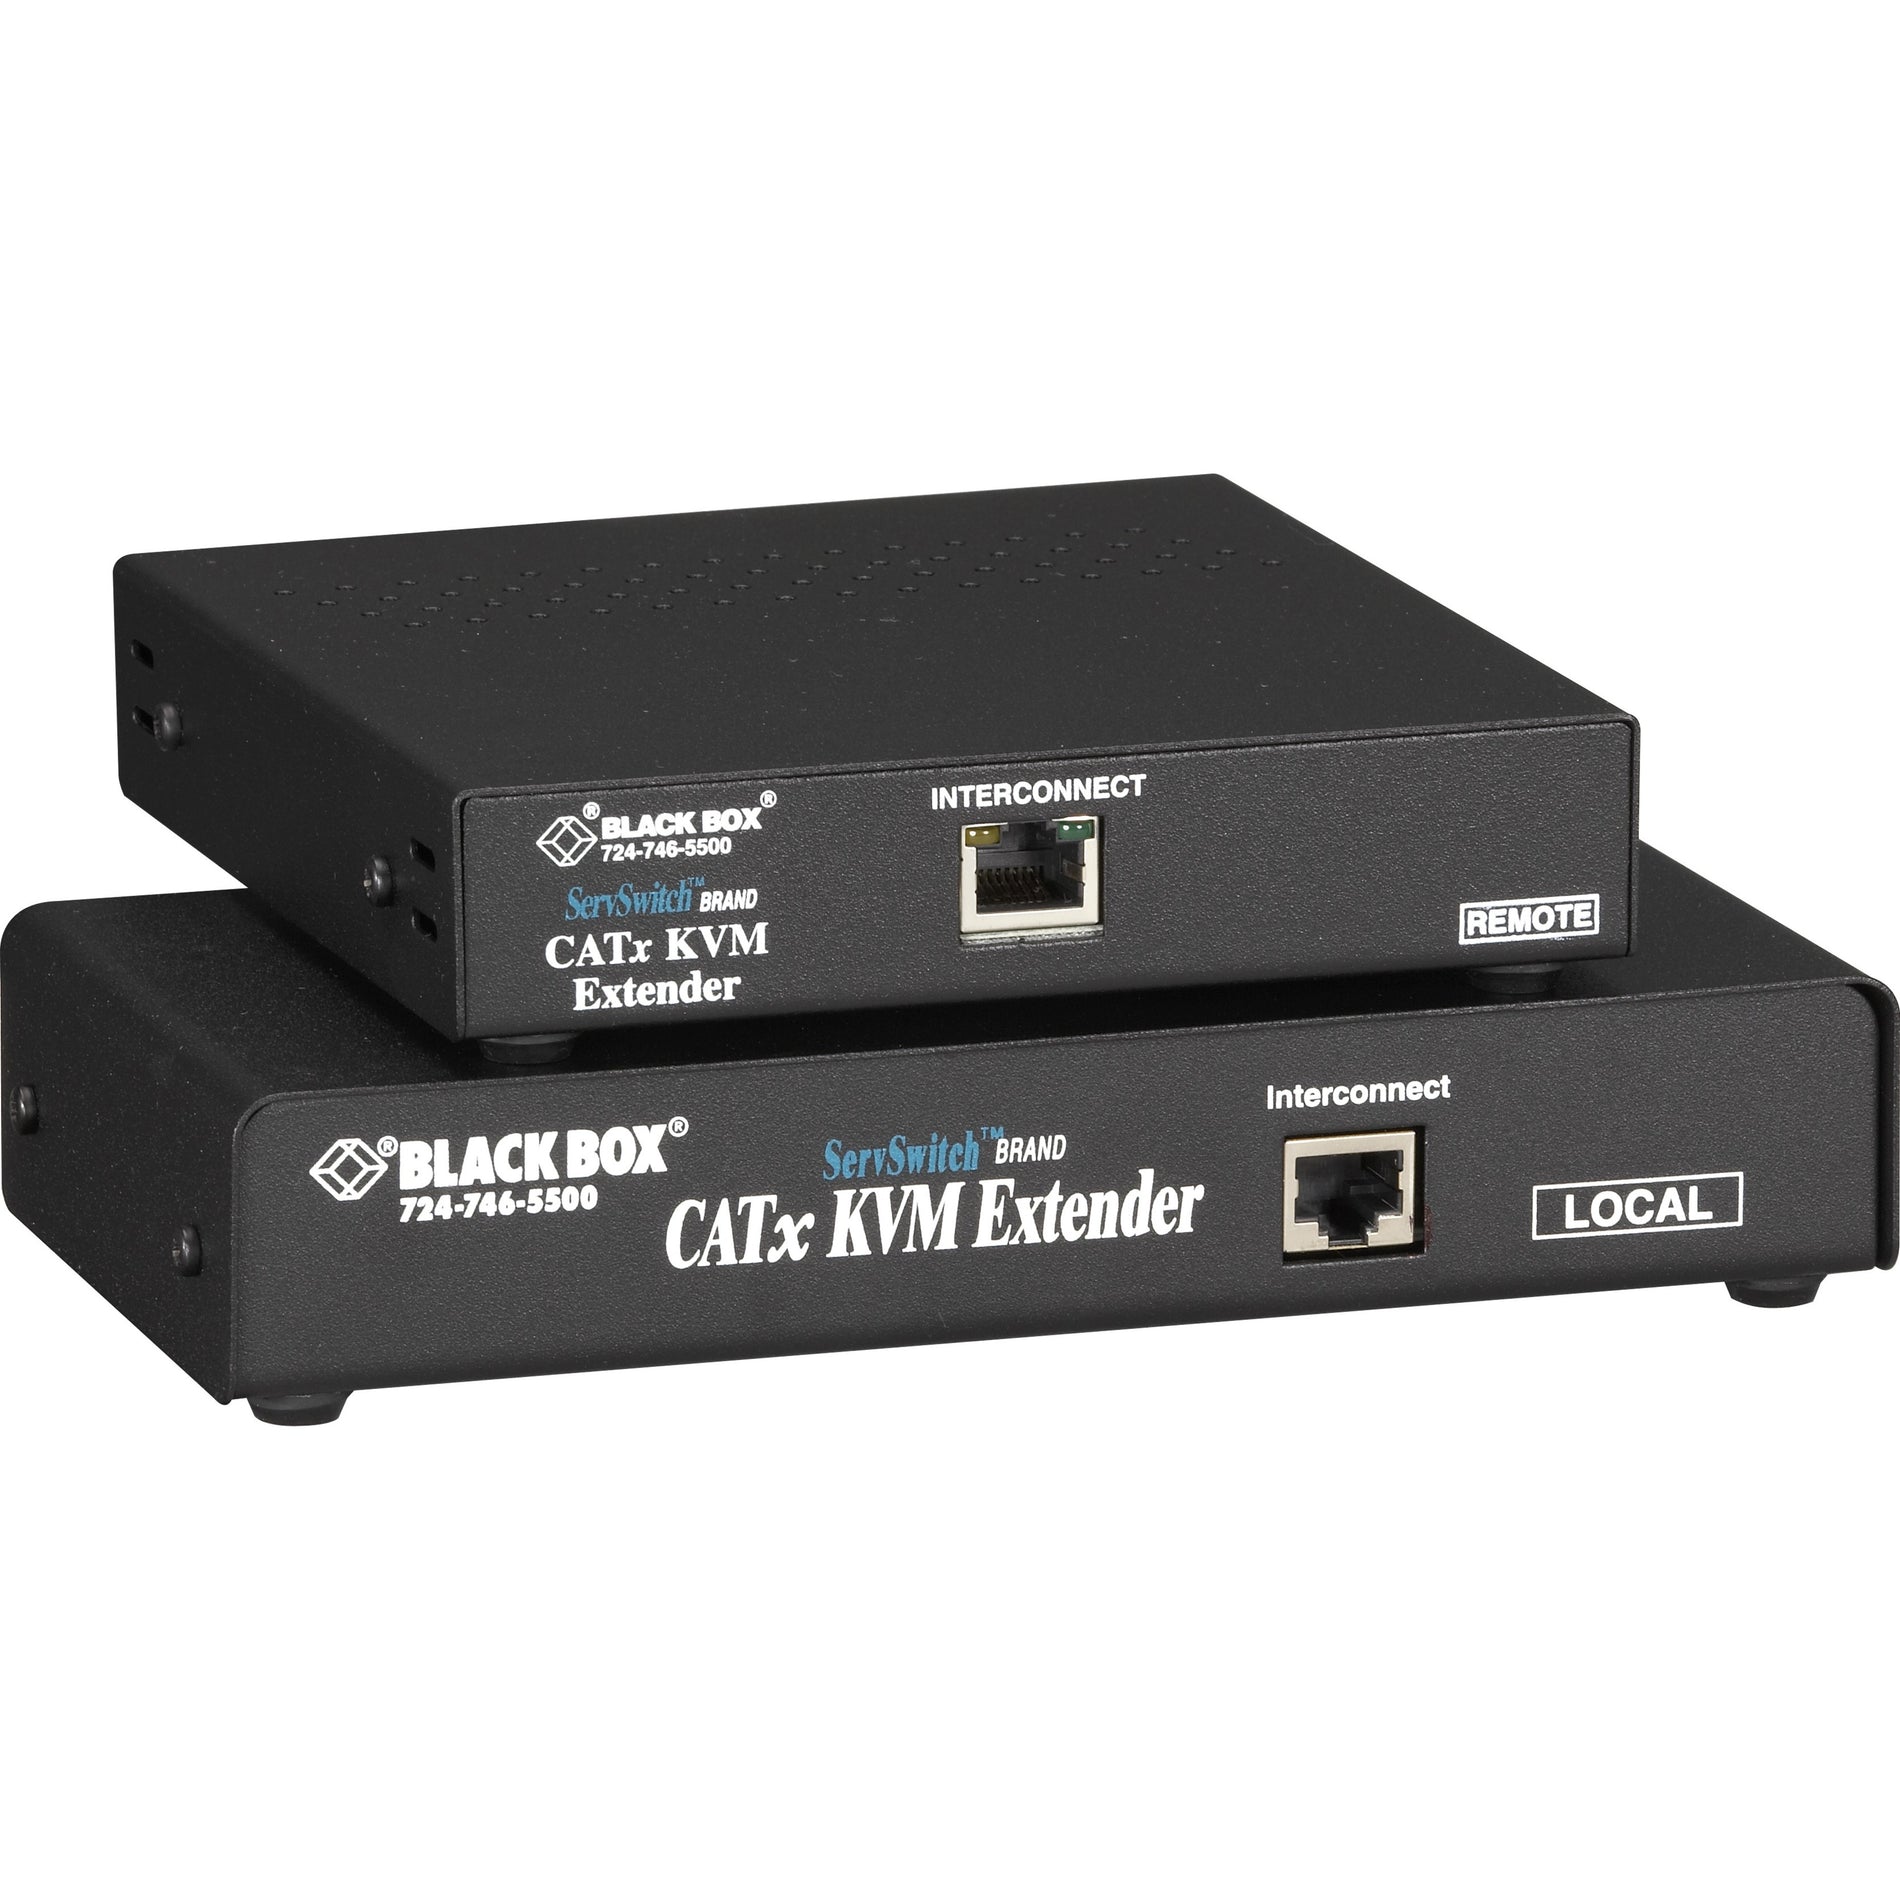 Black Box ACU2009A ServSwitch KVM Console/Extender, Dual-Access Kit for Point-to-Point Extension